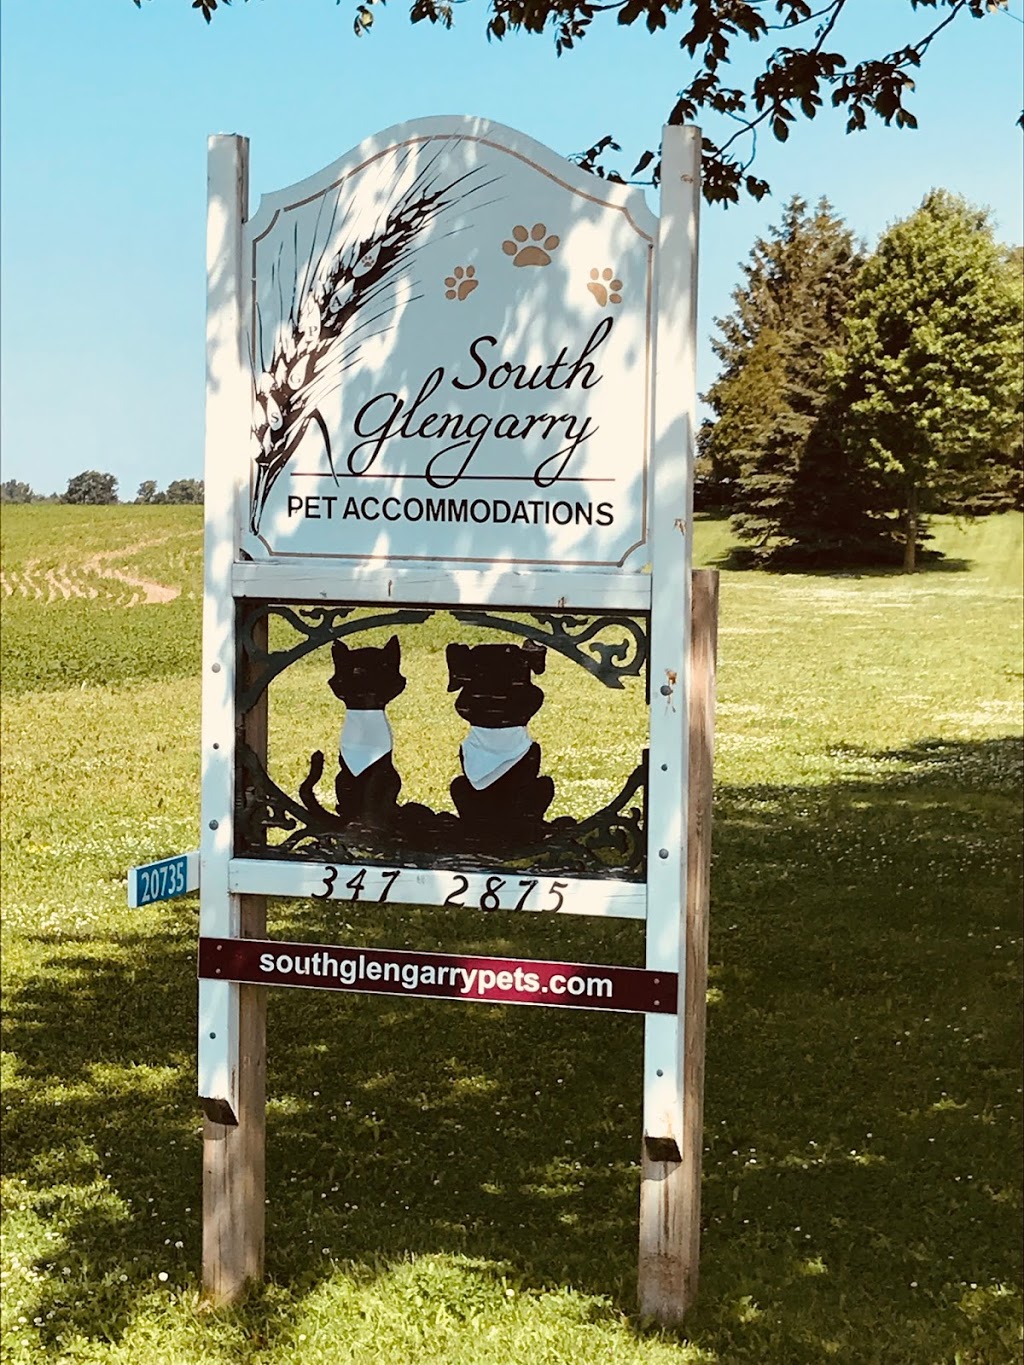 South Glengarry Pet Accommodations | 20735 Concession 2 Rd, Lancaster, ON K0C 1N0, Canada | Phone: (613) 347-2875